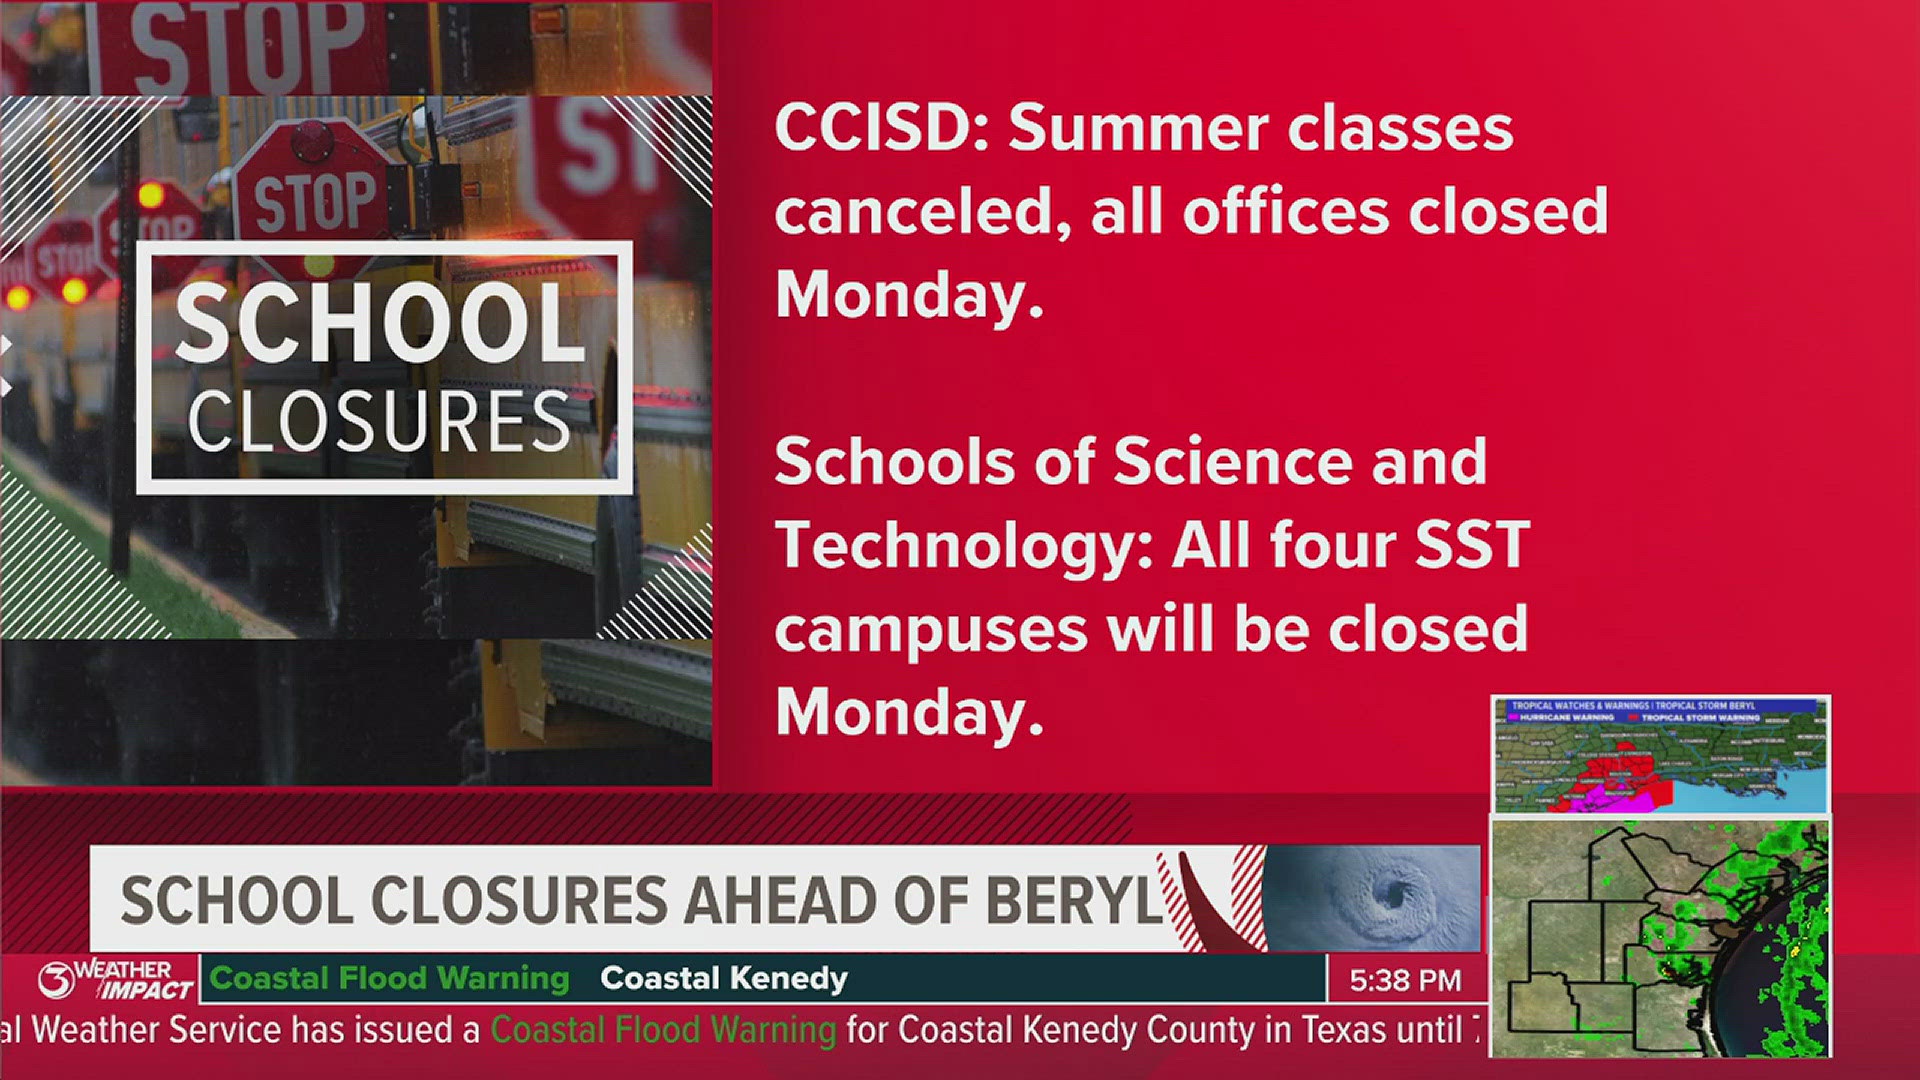 Here's the latest on school and business closings ahead of Beryl.